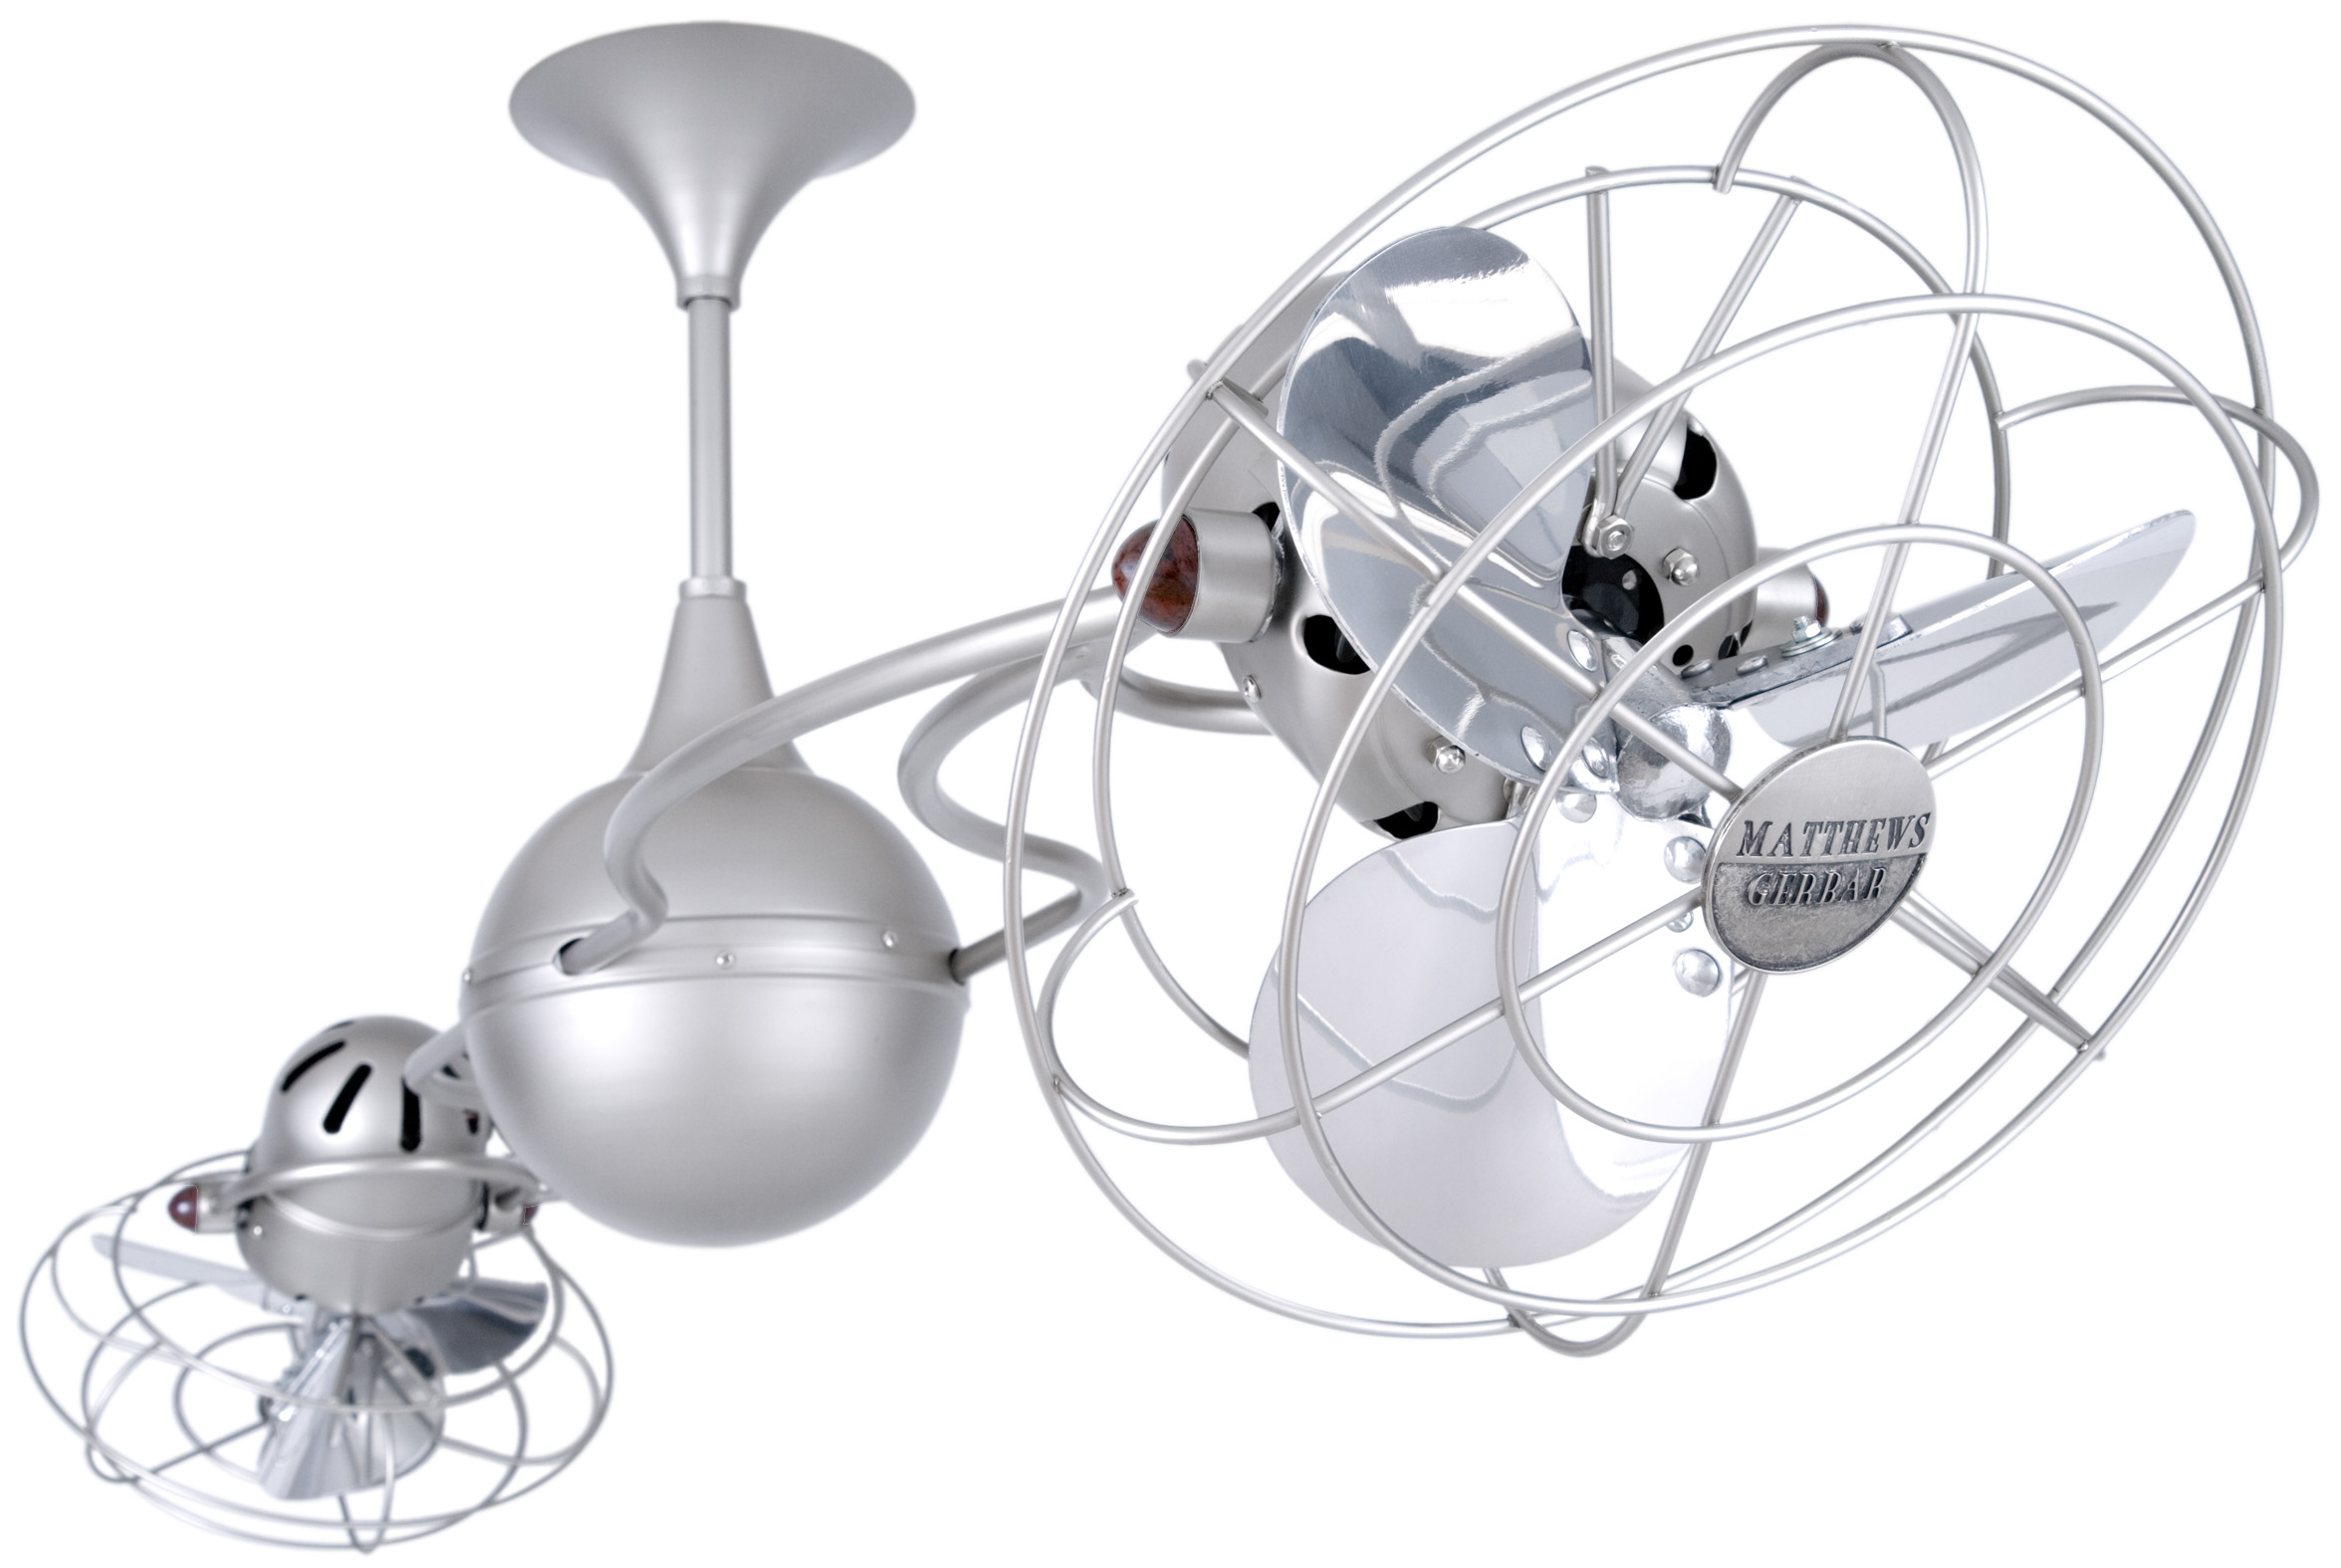 Italo Ventania Rotational Dual Head Ceiling Fan in Brushed Nickel Finish with Metal Blades and Decorative Cage